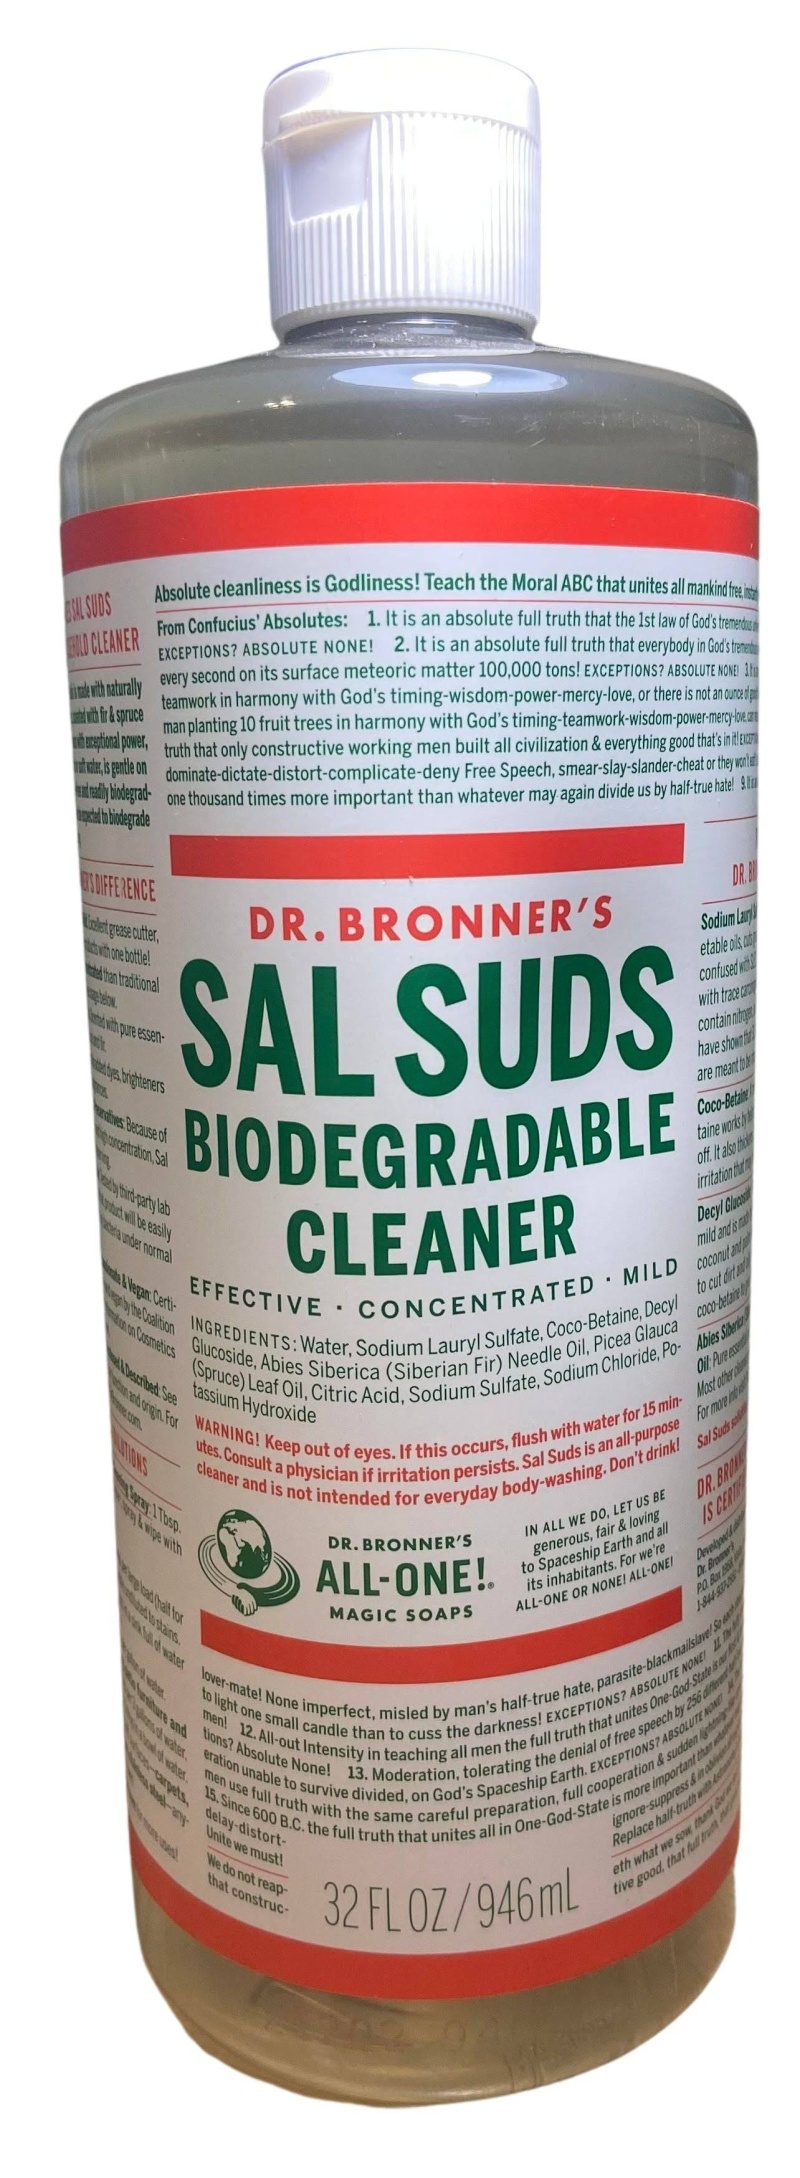 Dr. Bronners Sal Suds Biodegradable Cleaner Concentrated